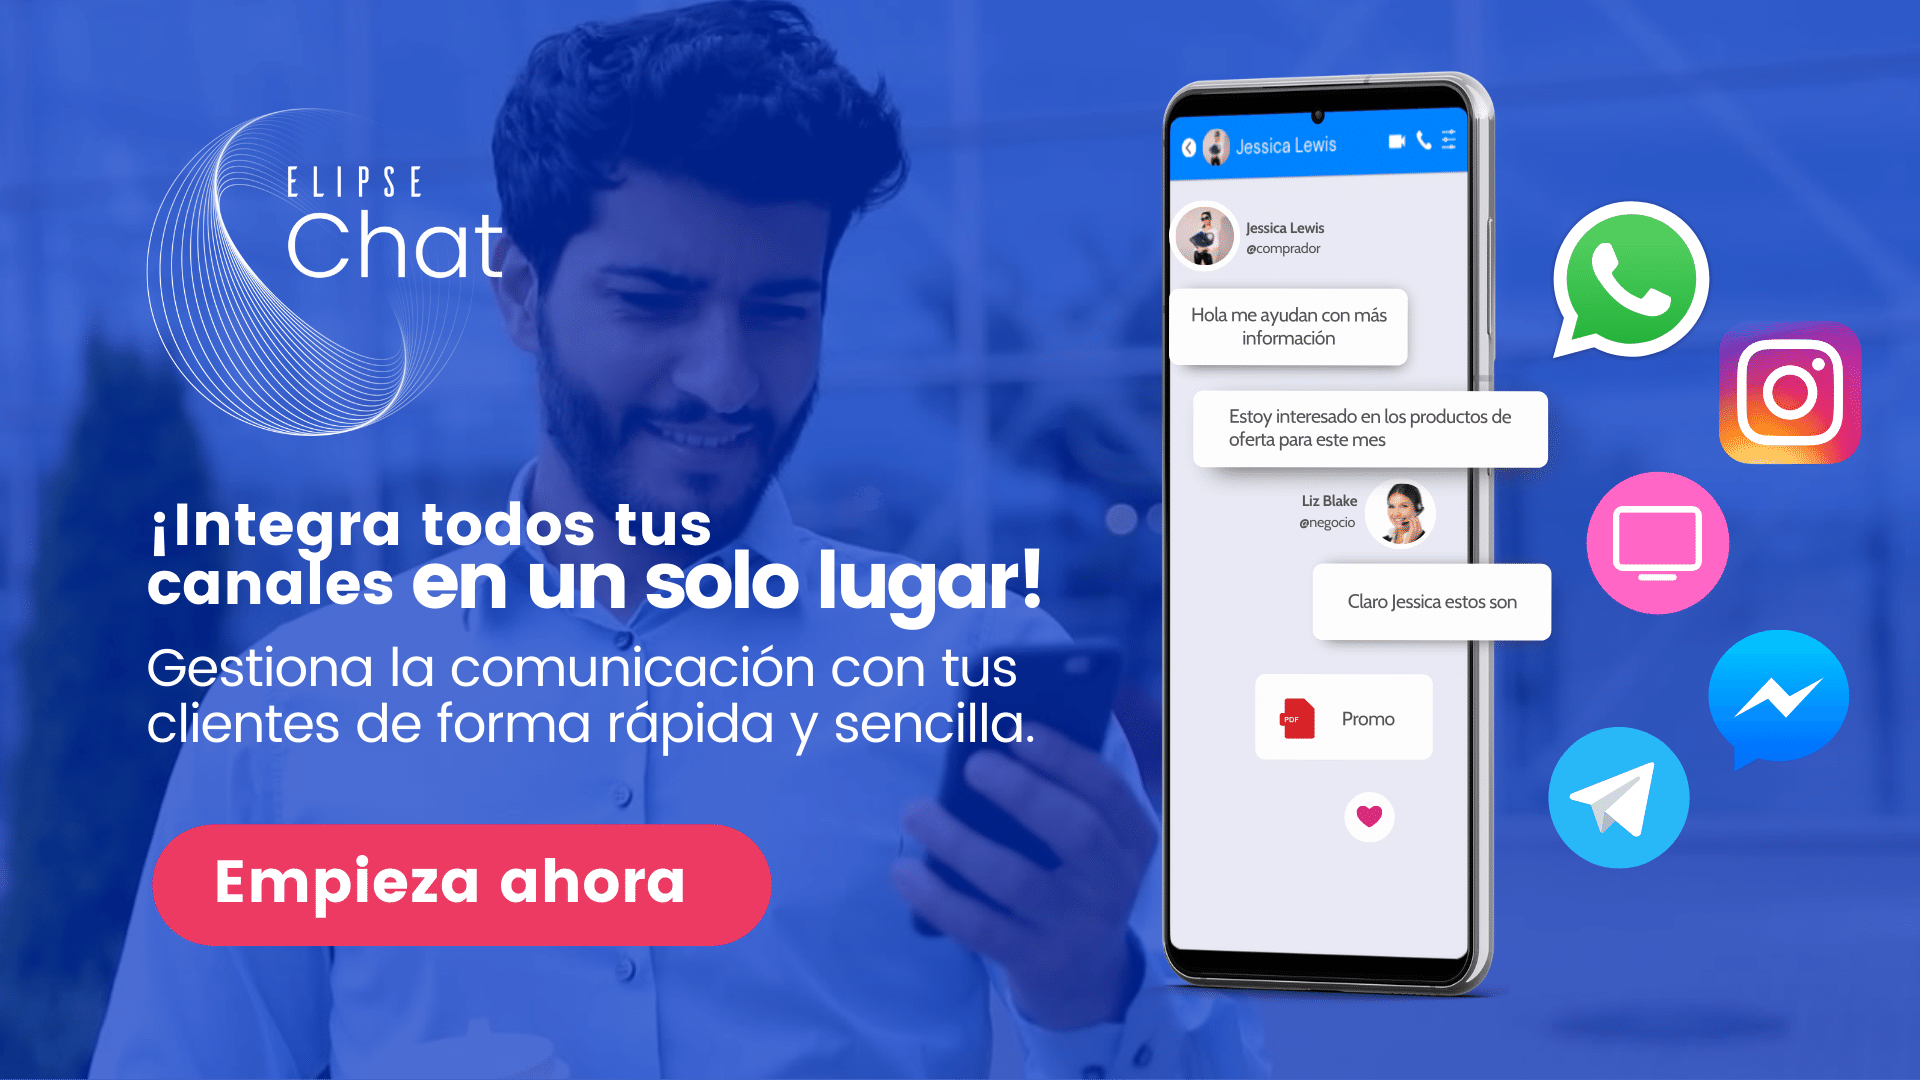 Elipse Chat - Integra tus canales